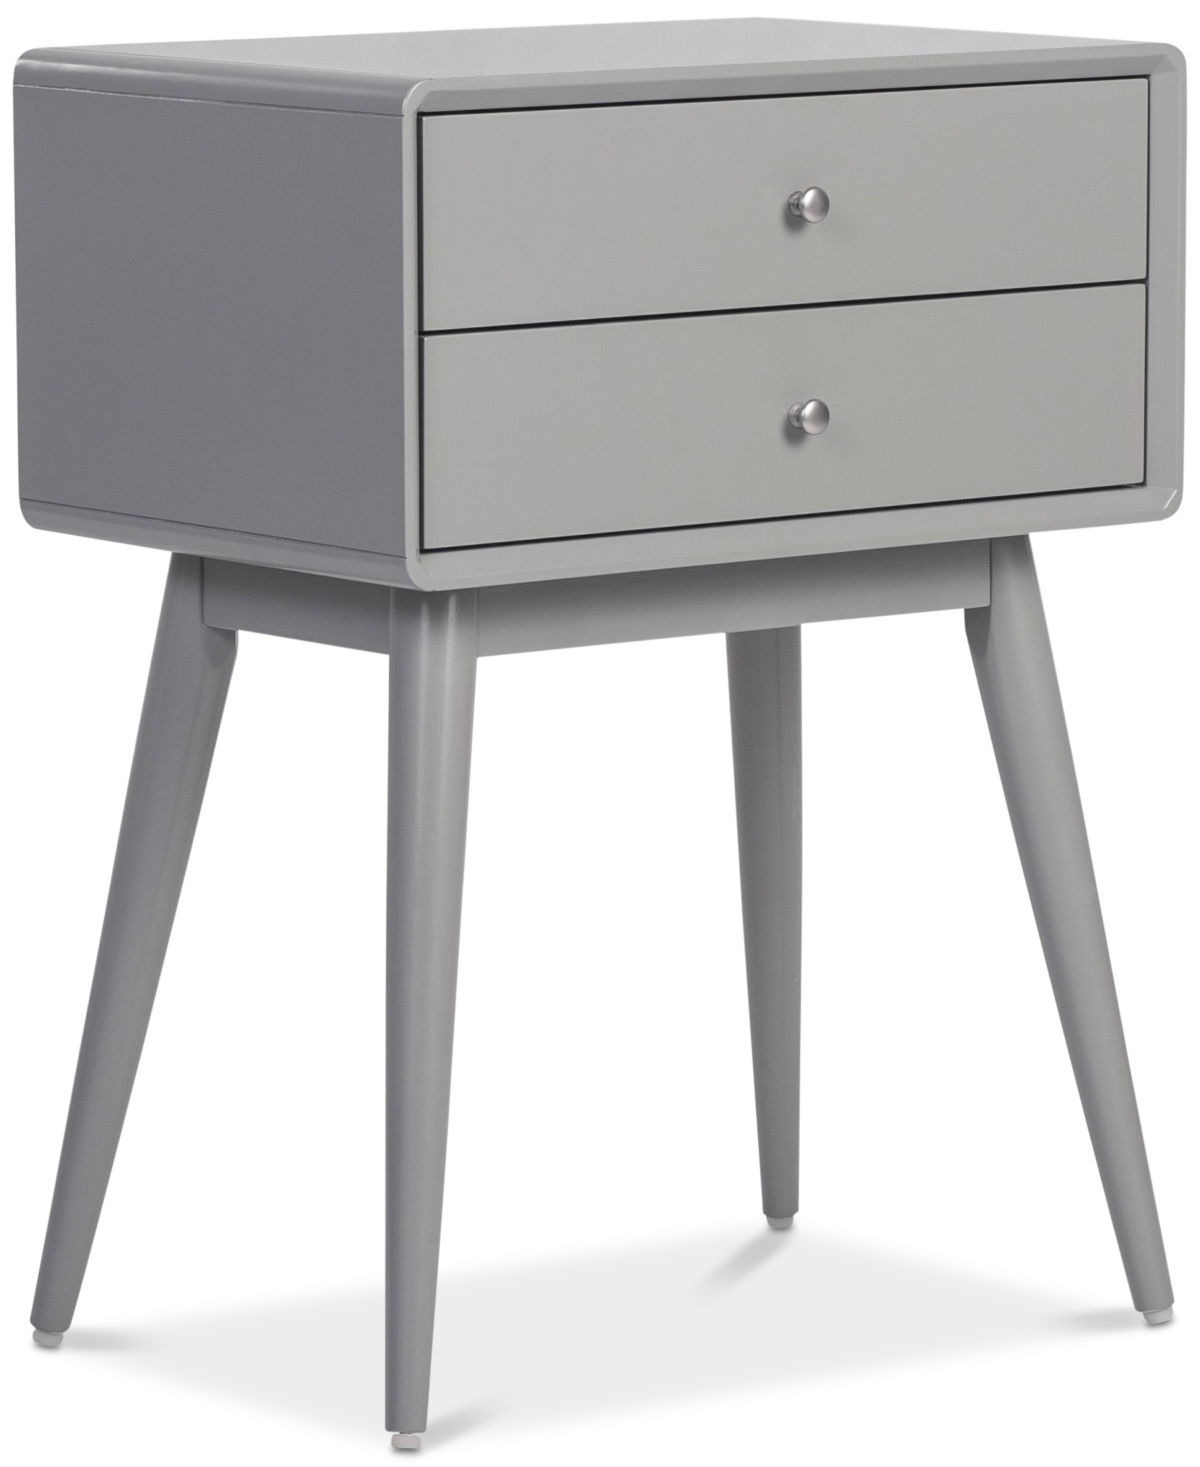 Elle Decor Rory 2-Drawer Side Table, Quick Ship